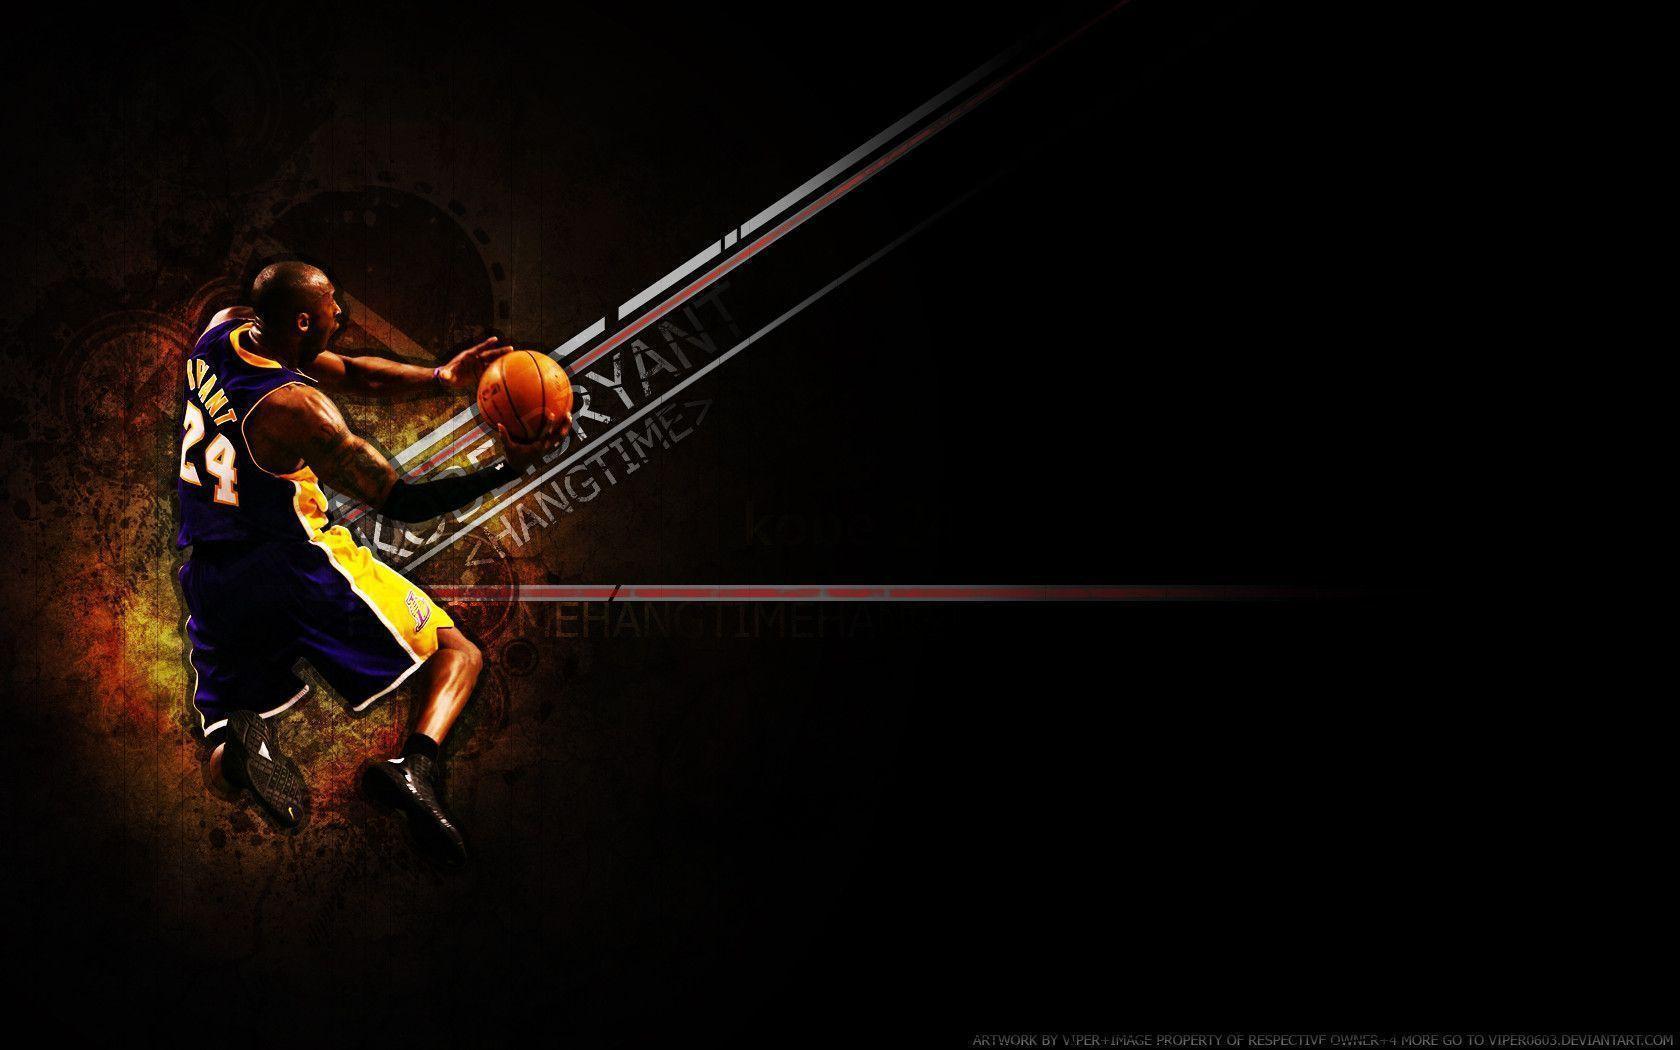 Nike Kobe Wallpaper, wallpaper, Nike Kobe Wallpapers hd wallpapers